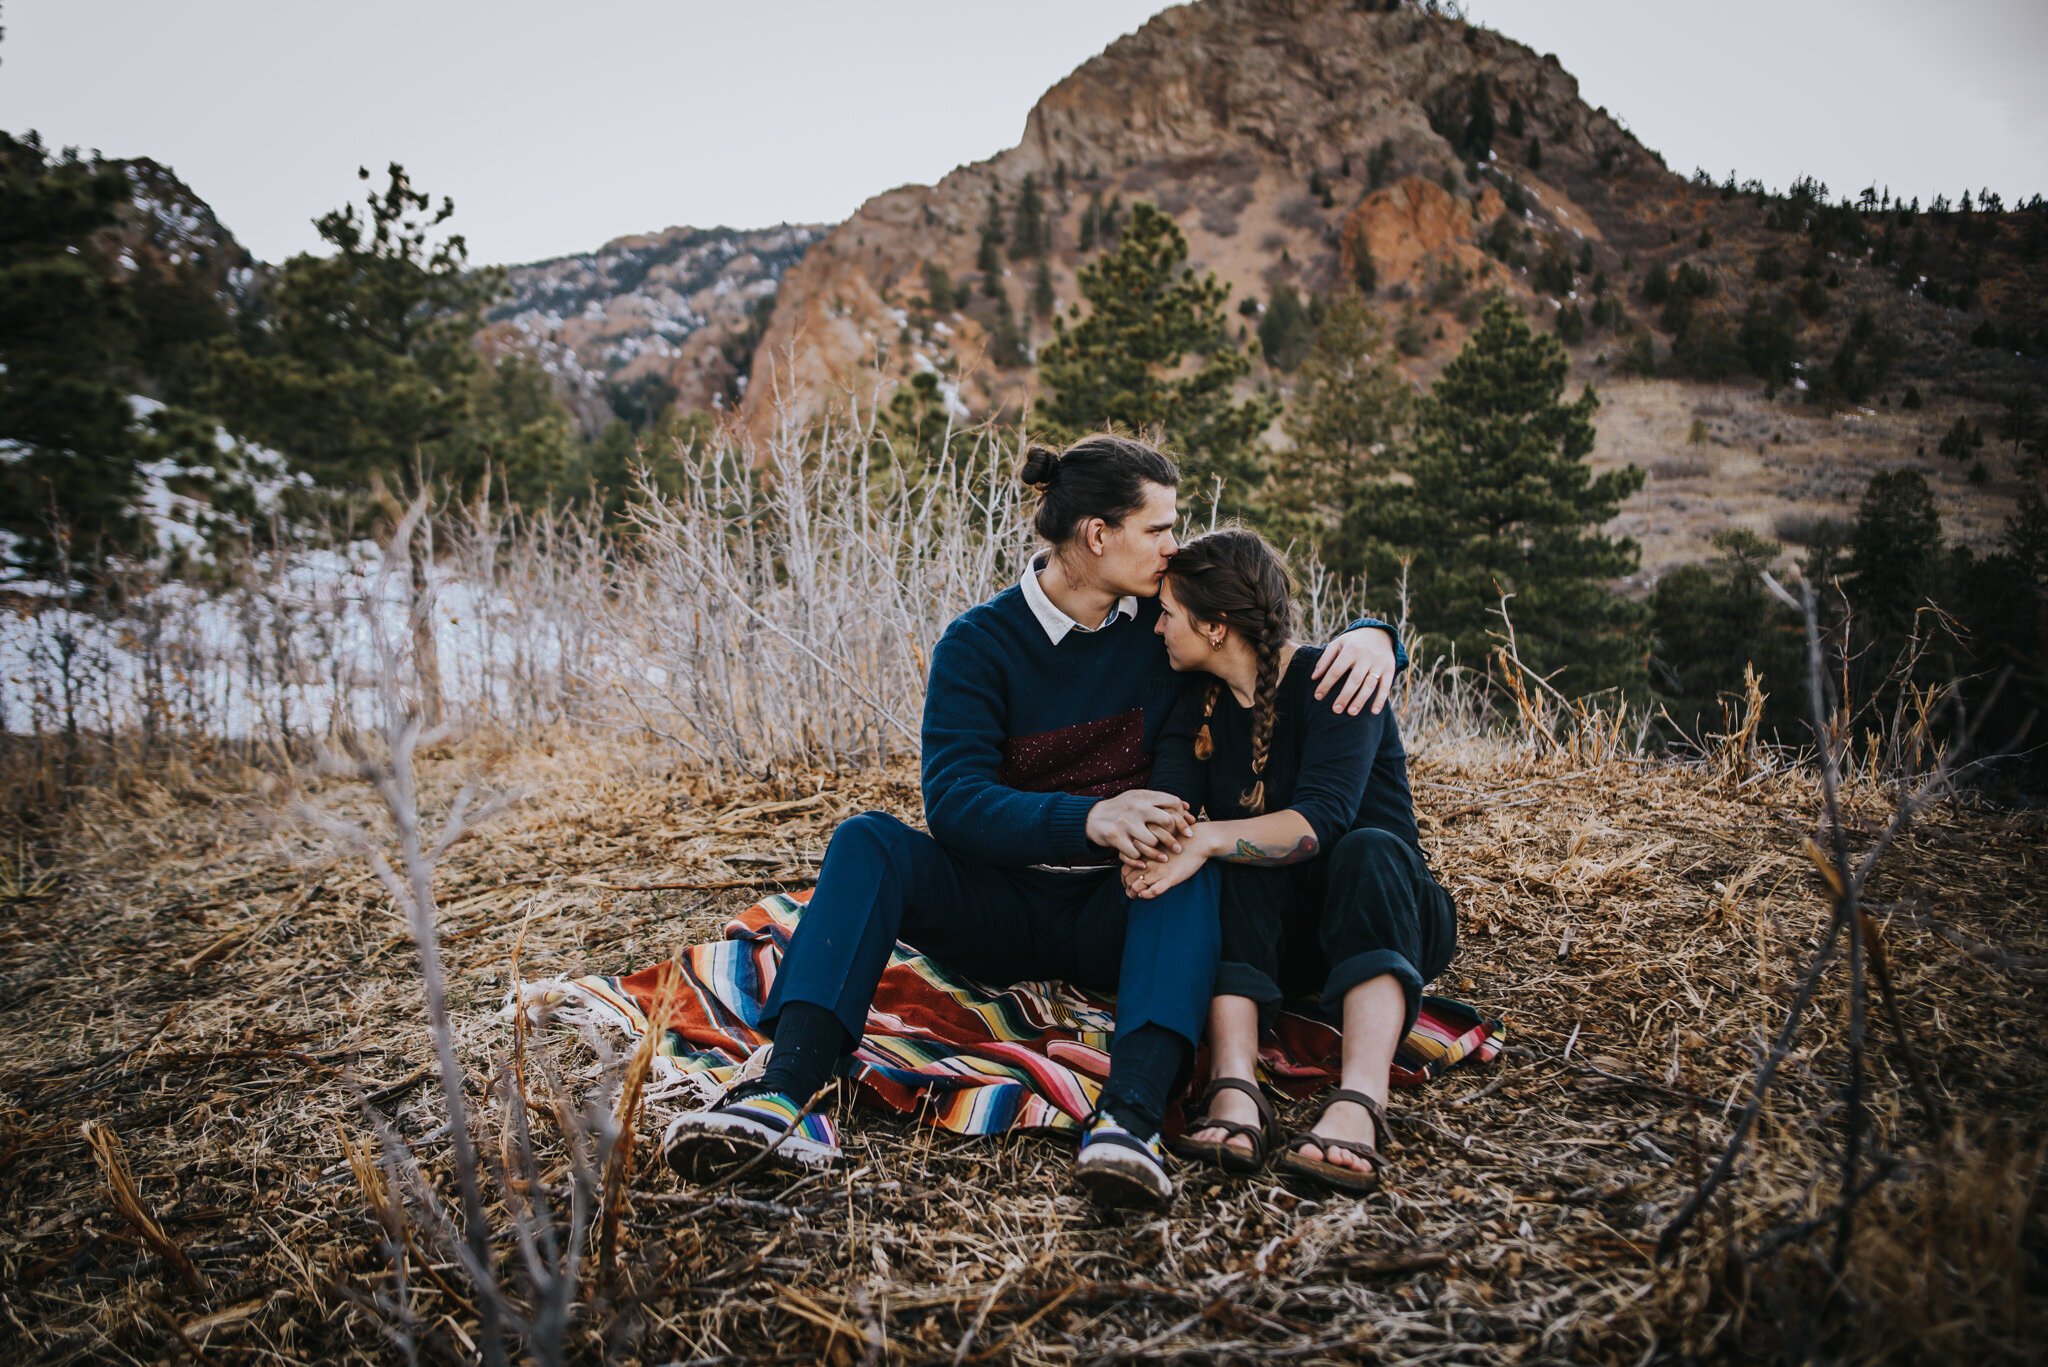 Yulia+and+Logan+Couples+Session+Colorado+Springs+Colorado+Sunset+Cheyenne+Canyon+Husband+Wife+Wild+Prairie+Photography-22-2020.jpeg